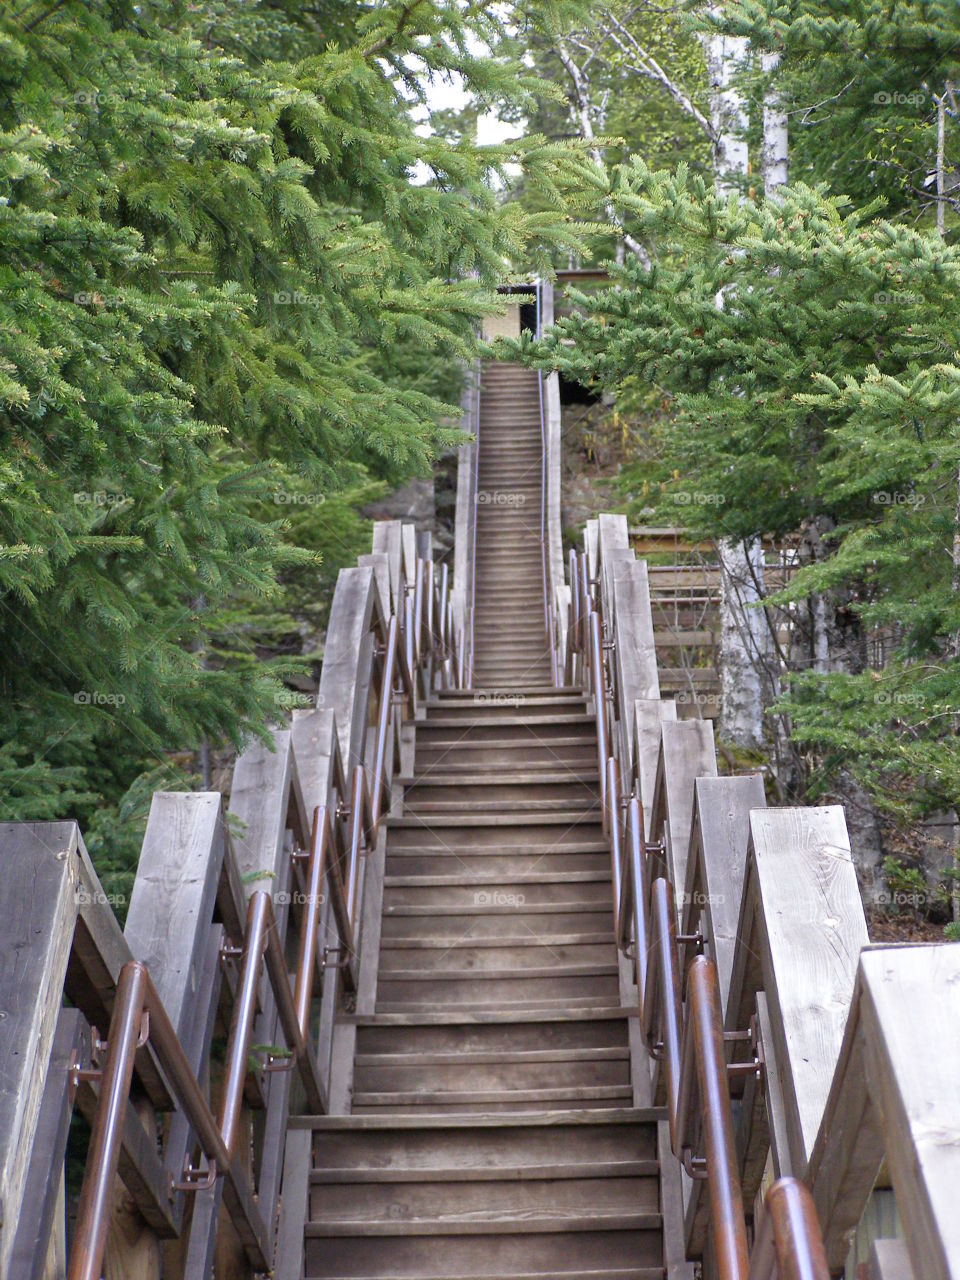 Stairs to the shore (Split Rock Lighthouse)